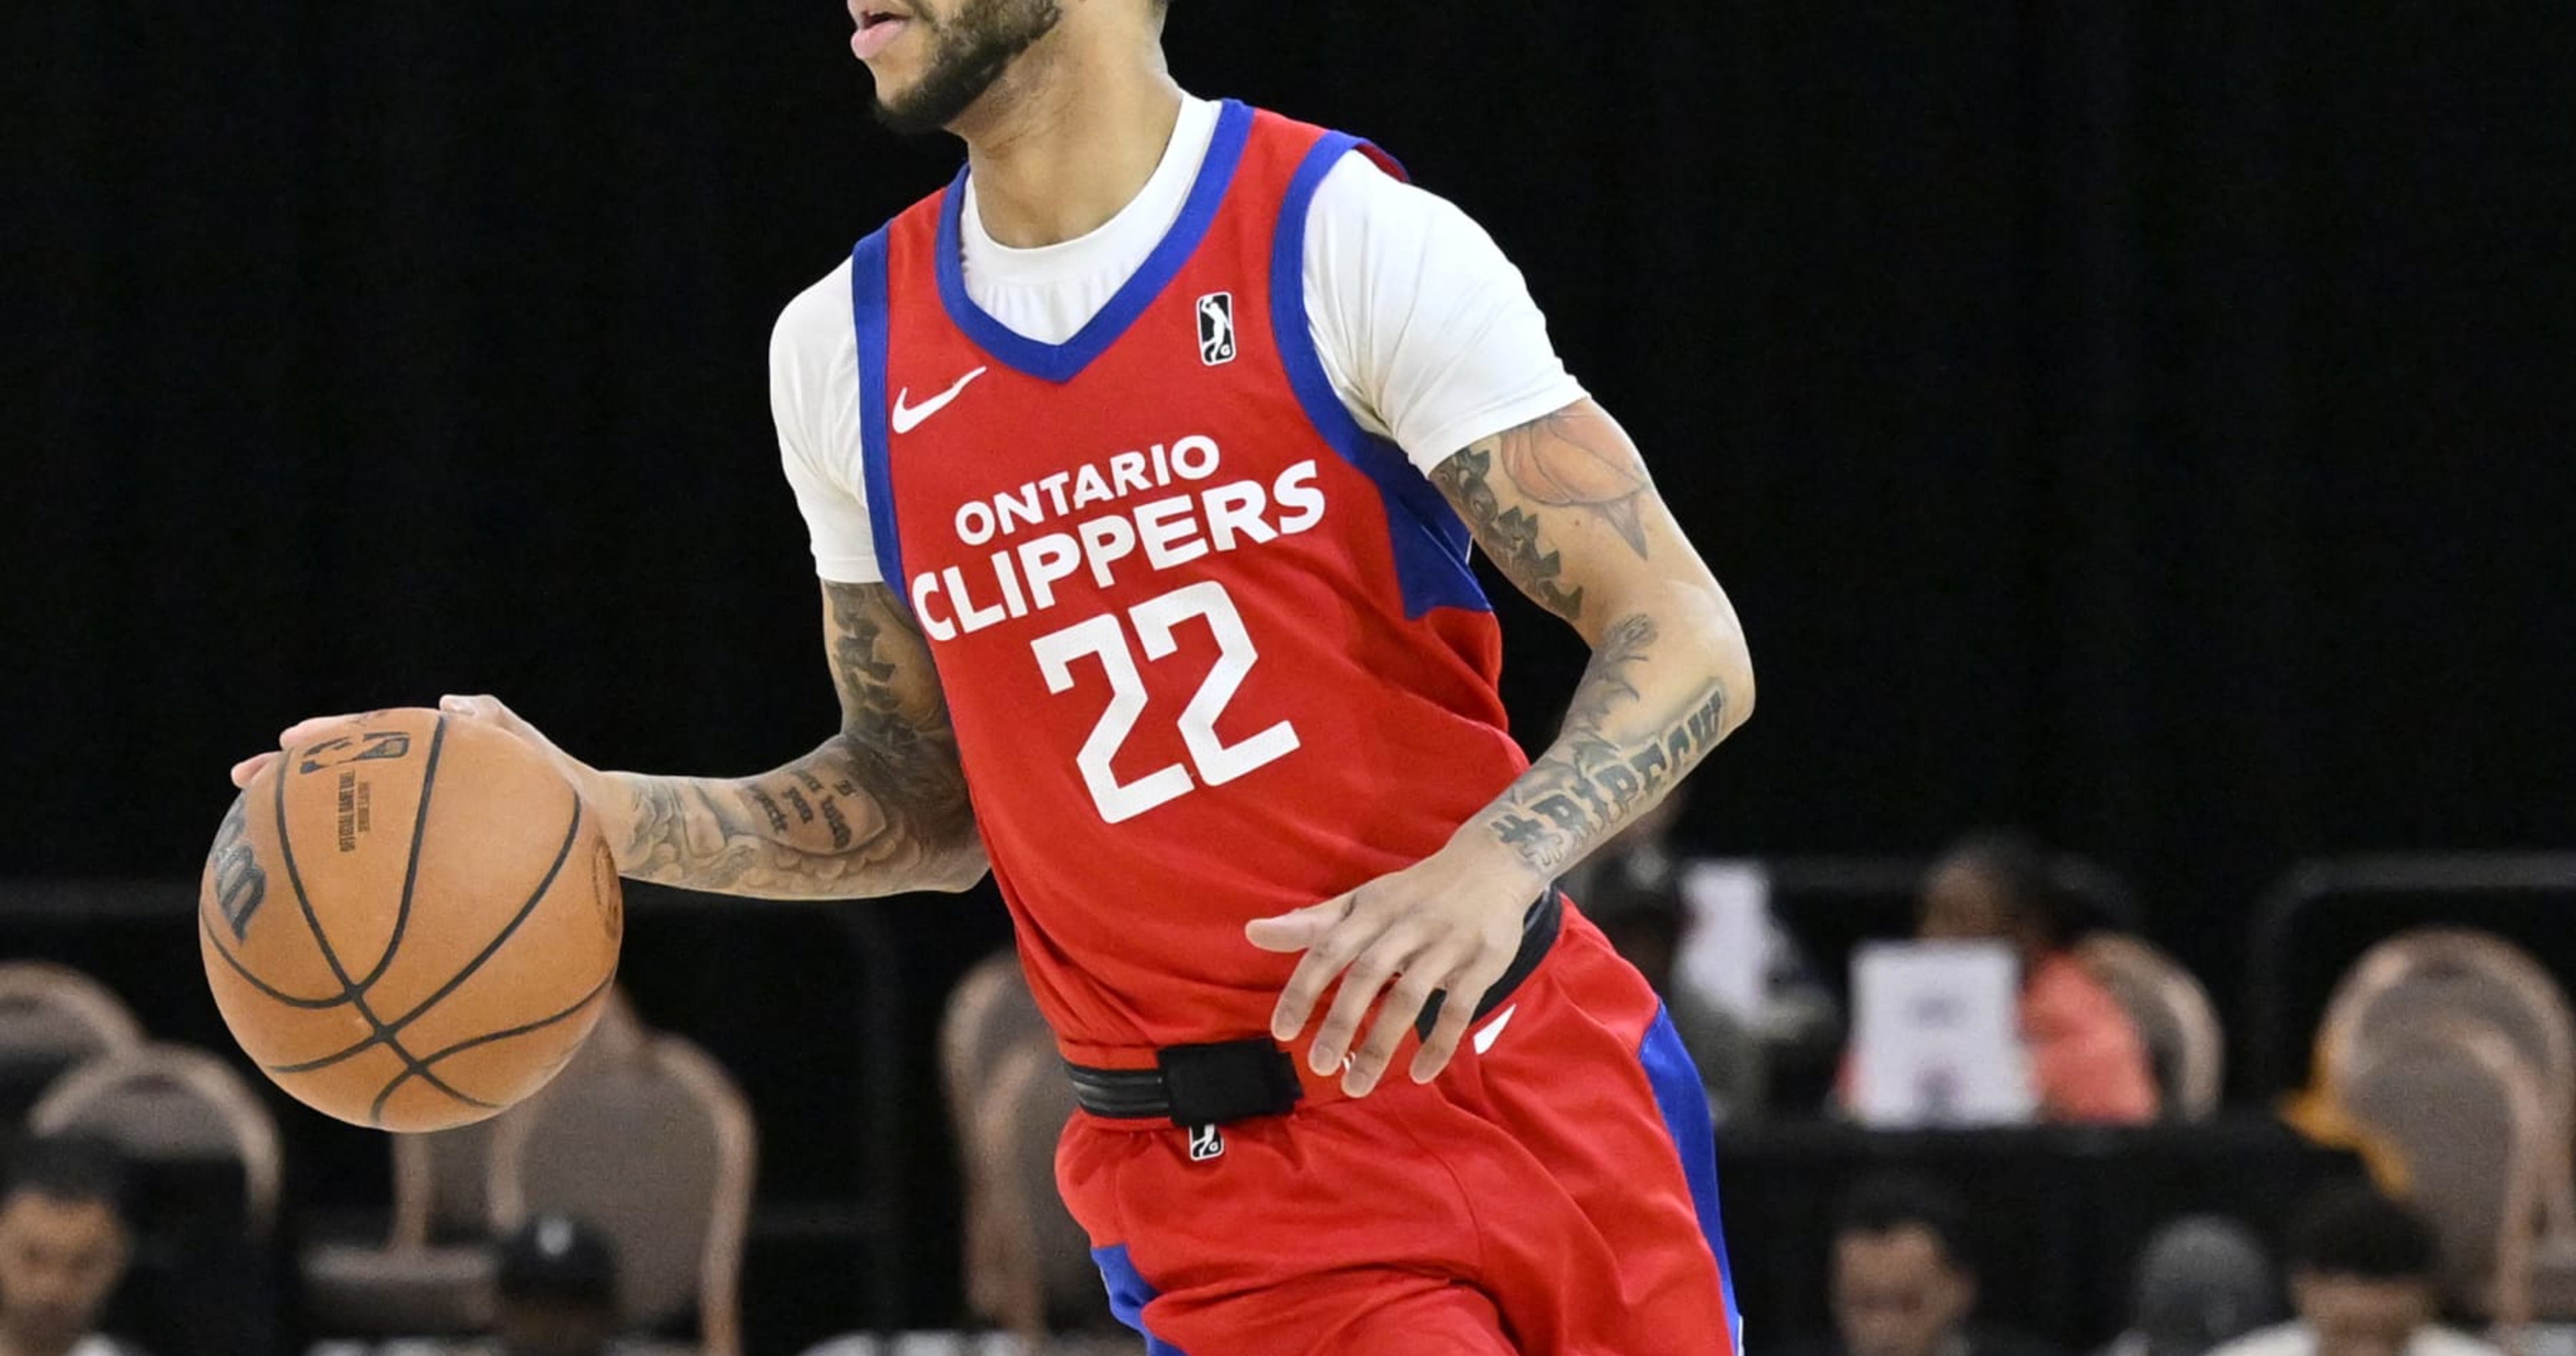 NBA G League Showcase Cup Championship 2022: Clippers High Bulls At the support of Moon's GW Shot thumbnail